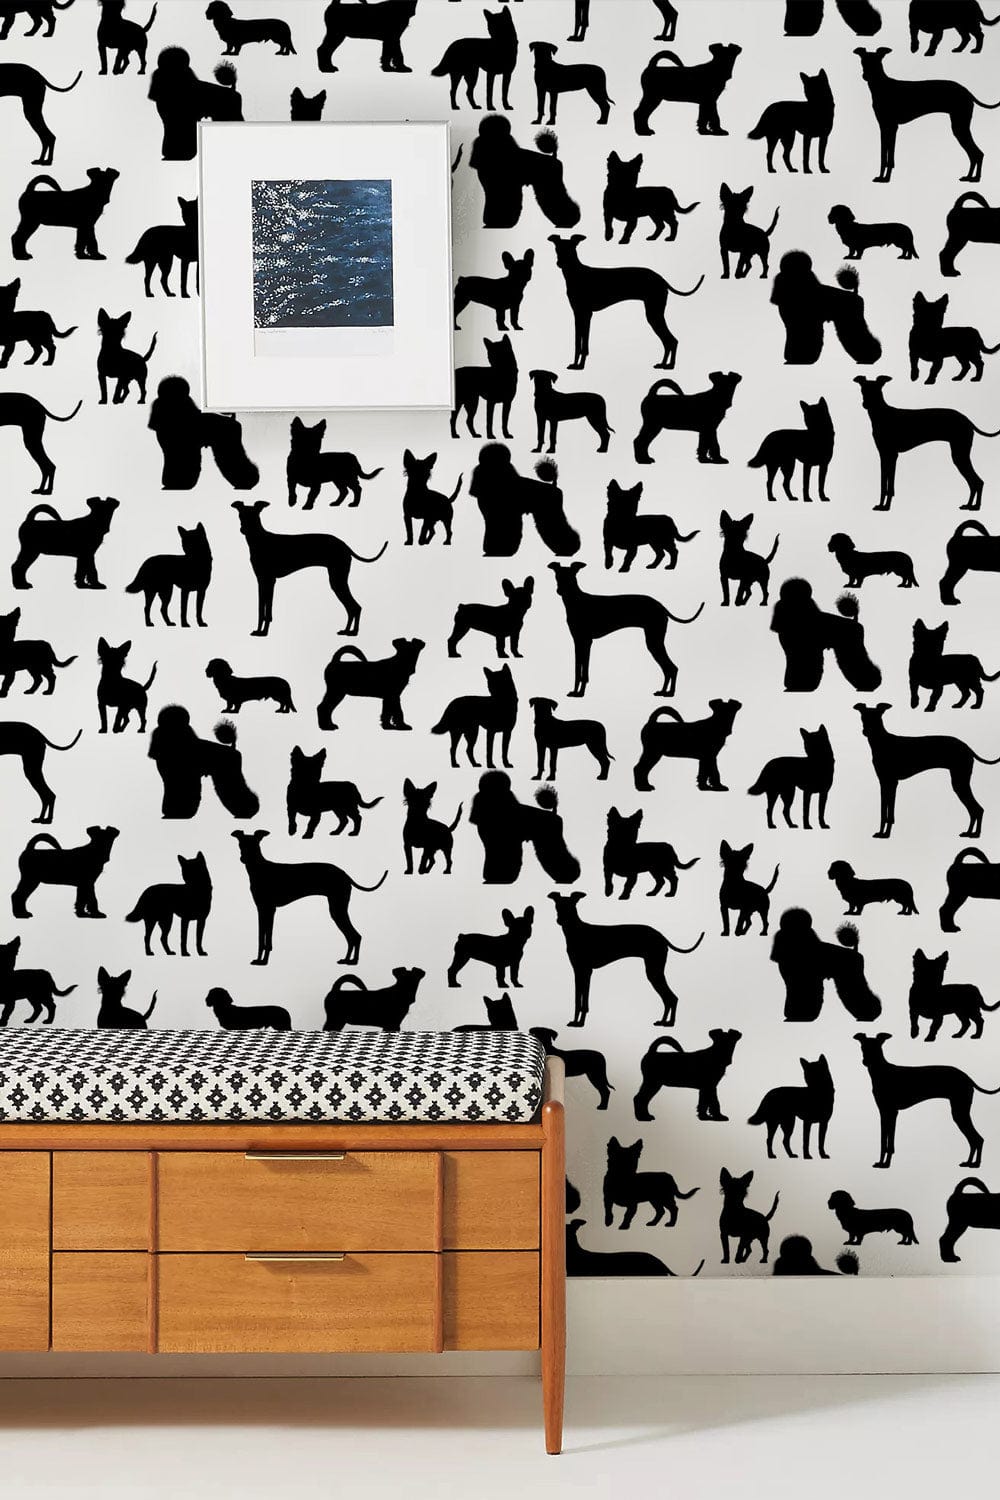 Dogs wallpaper murals for the hallway are a personalized option for dog lovers